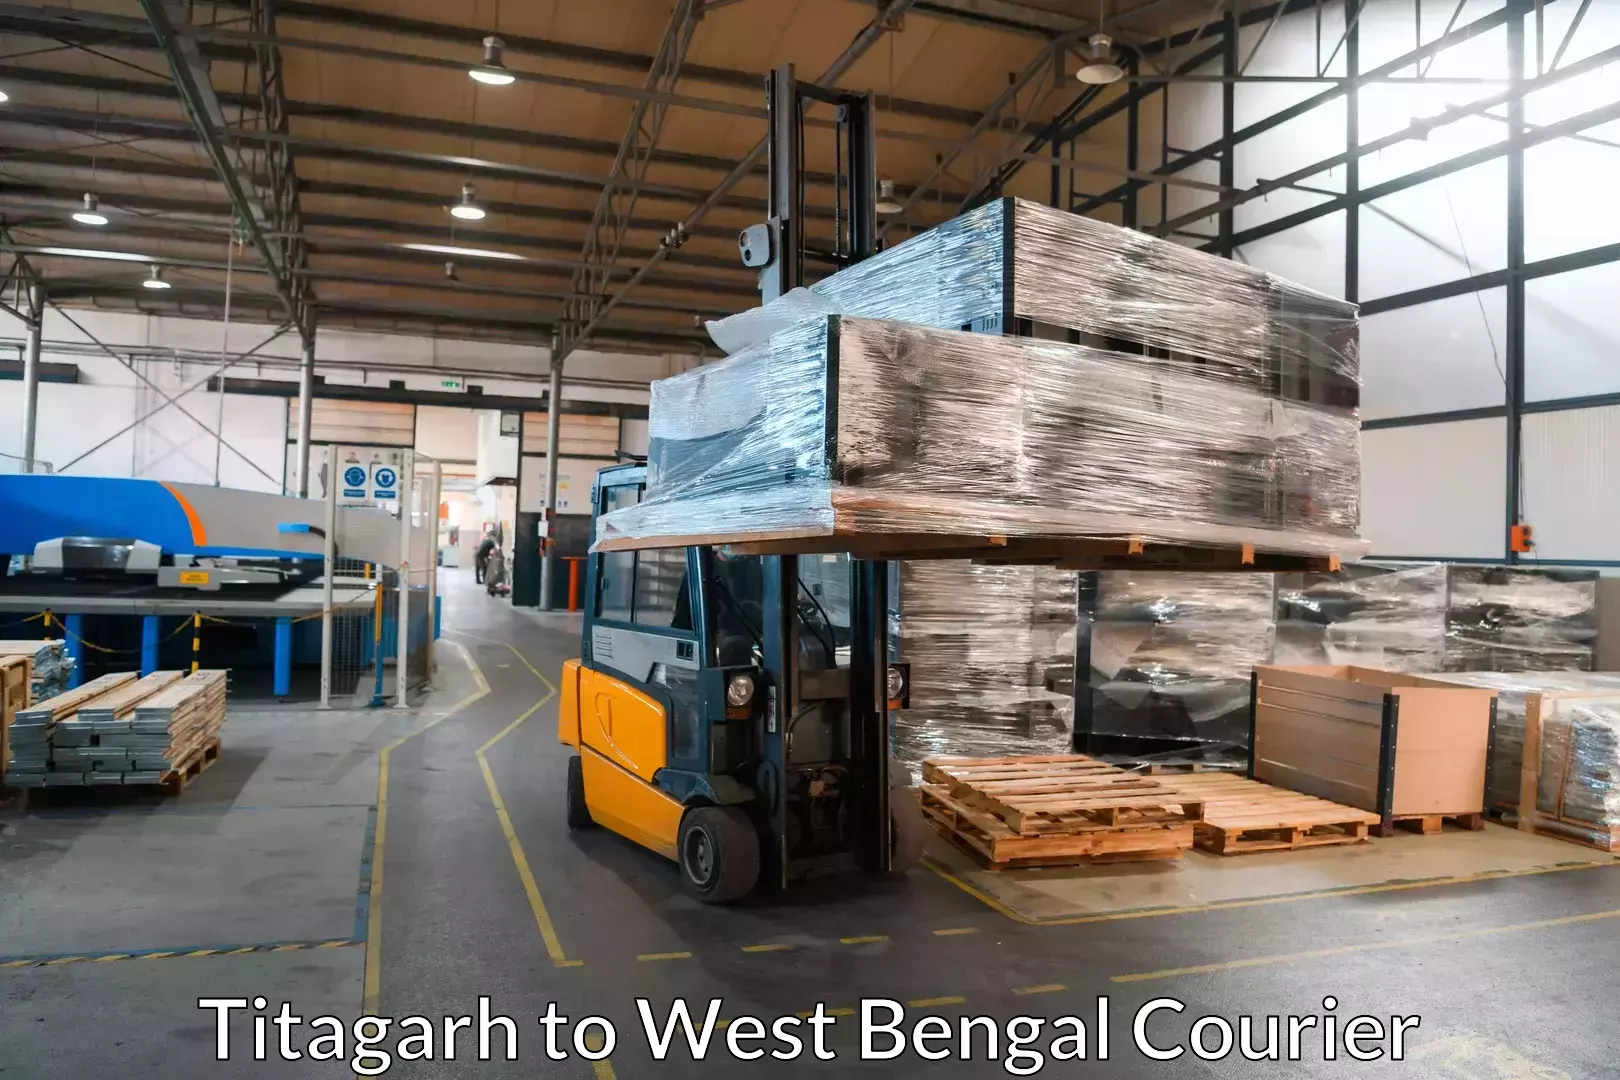 High-quality moving services in Titagarh to Kolkata Port